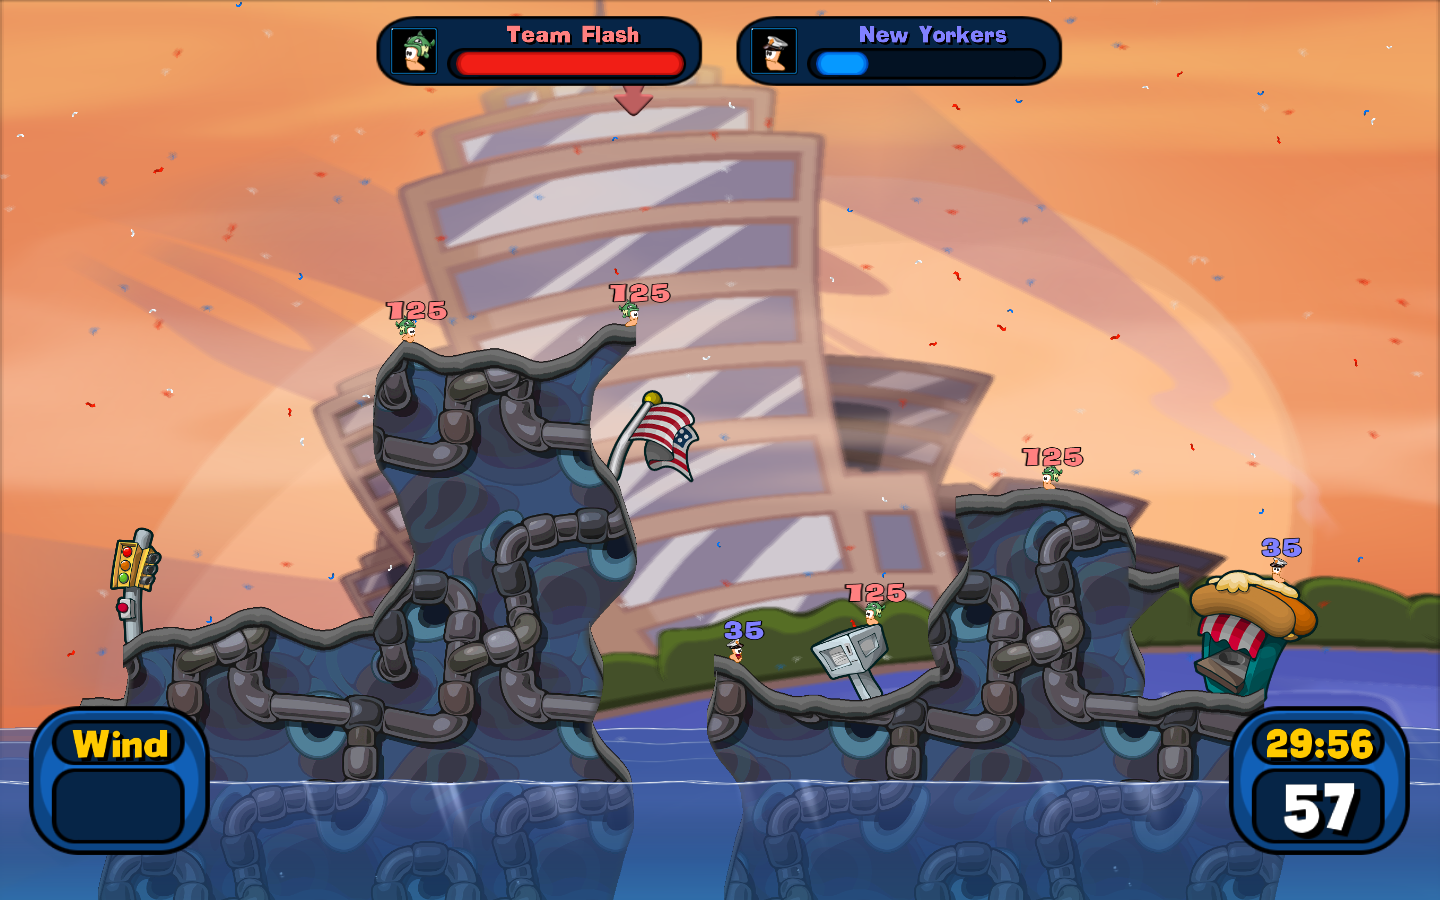 download worms 2 reloaded for free